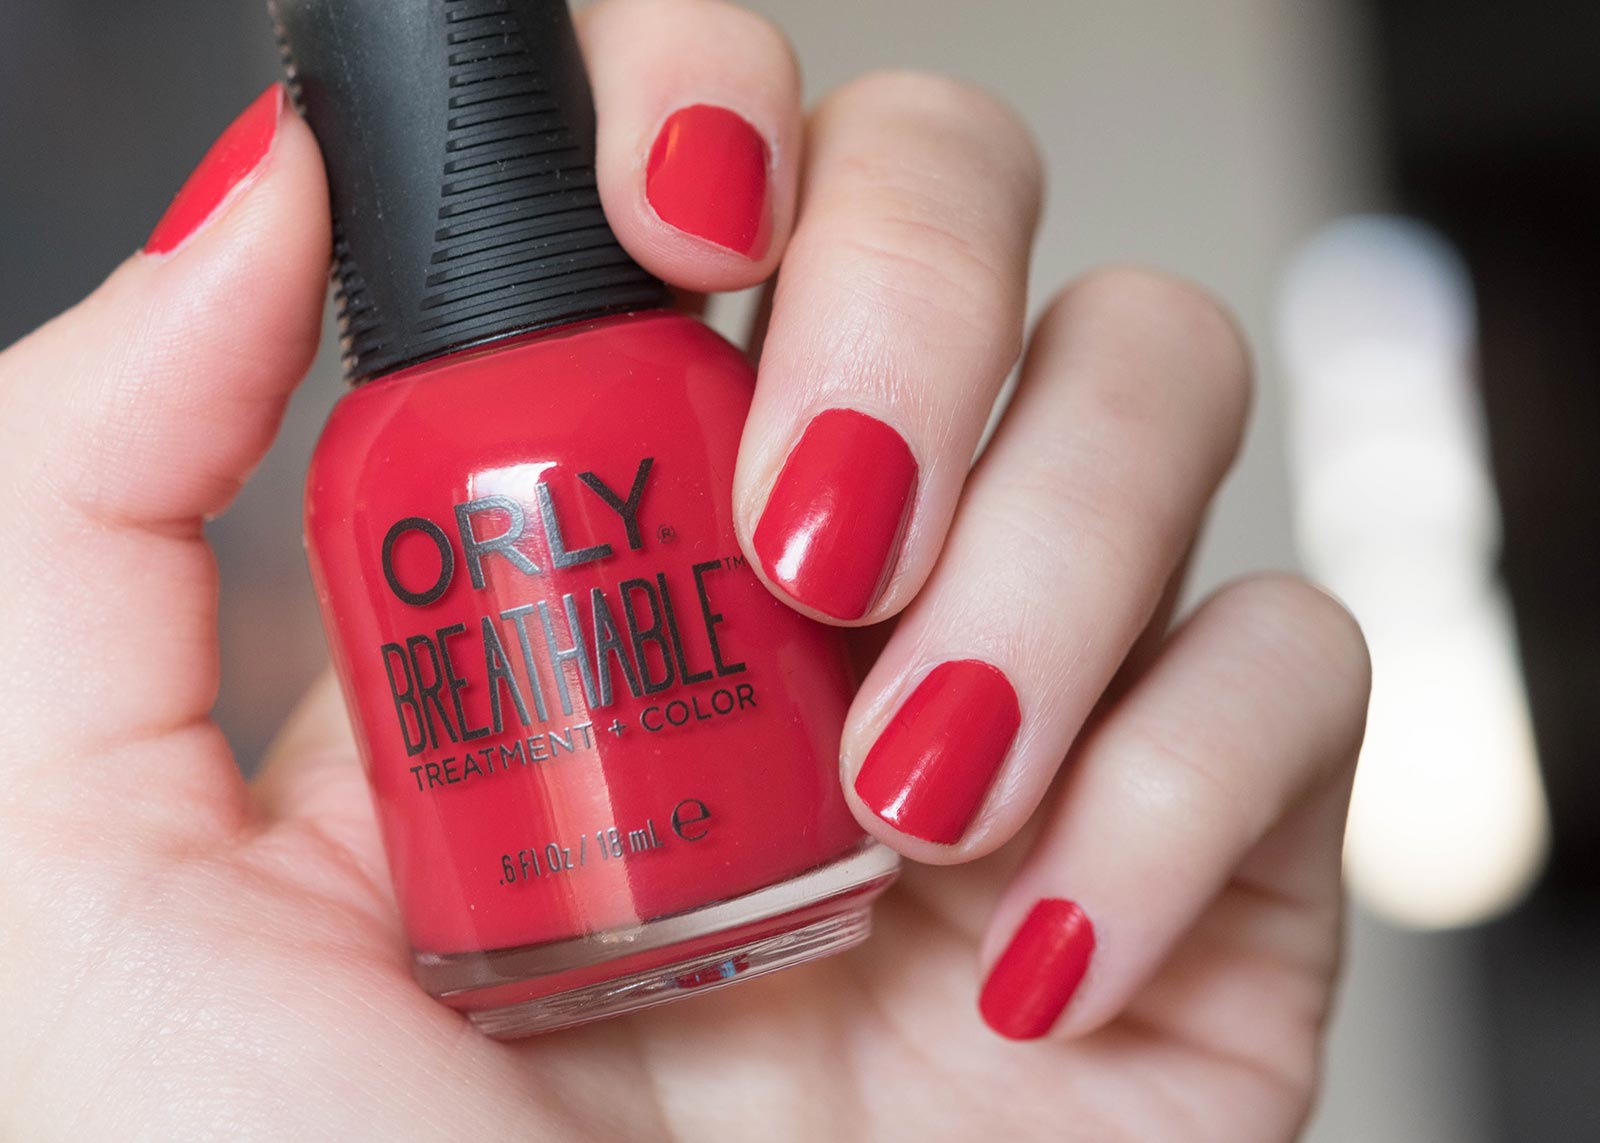 ORLY Breathable Treatment + Color Nail Polish - wide 1